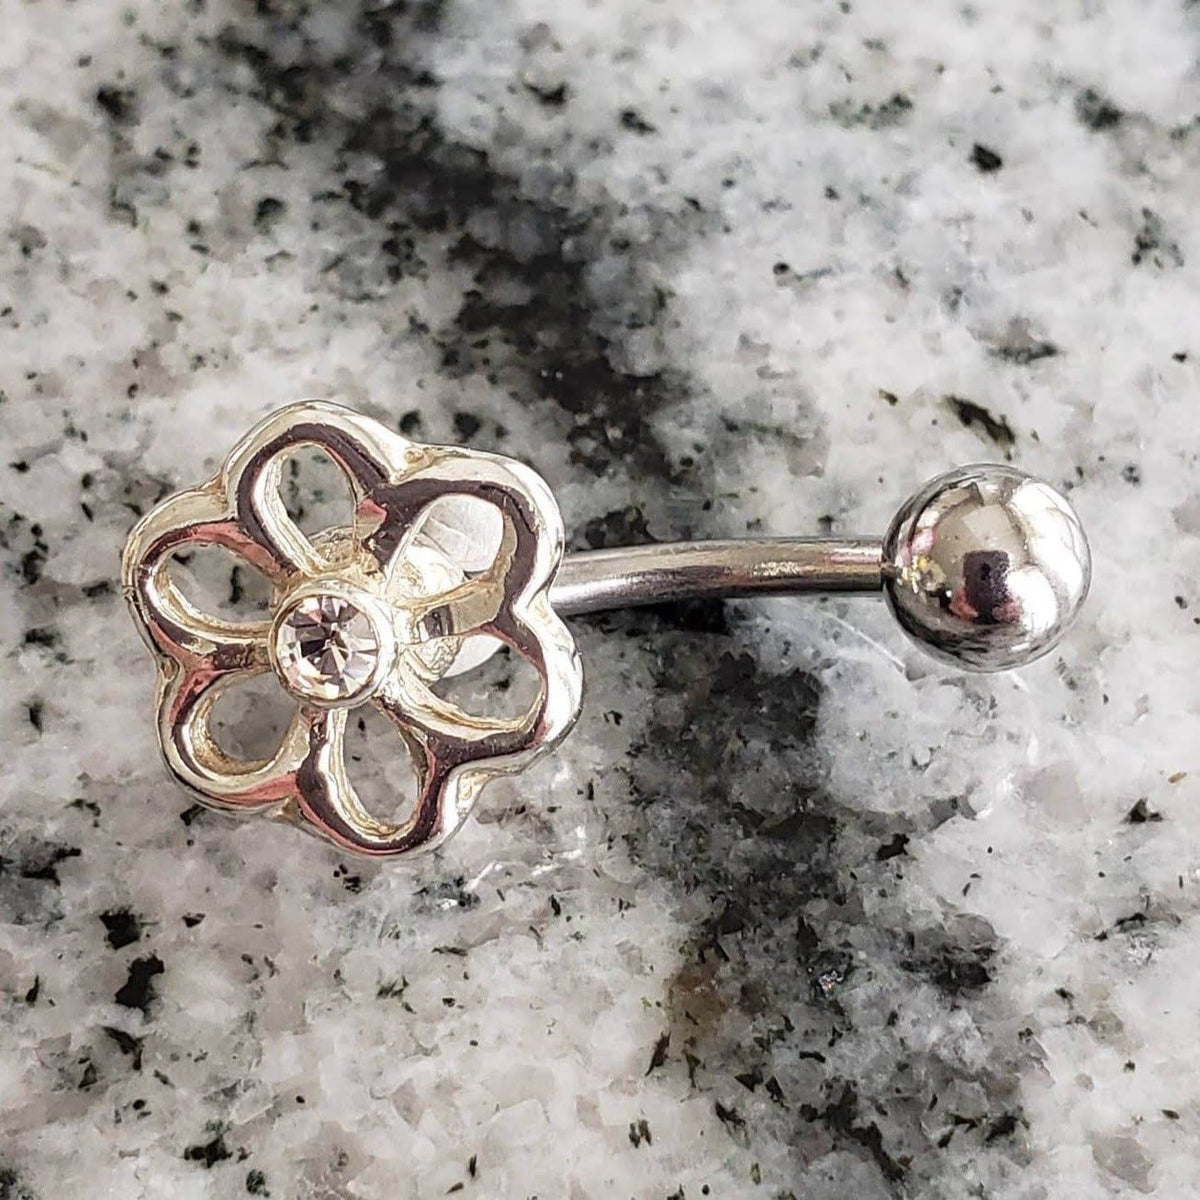 Flower Belly Ring |  Surgical Steel and 925 Silver | White Sapphire Crystal